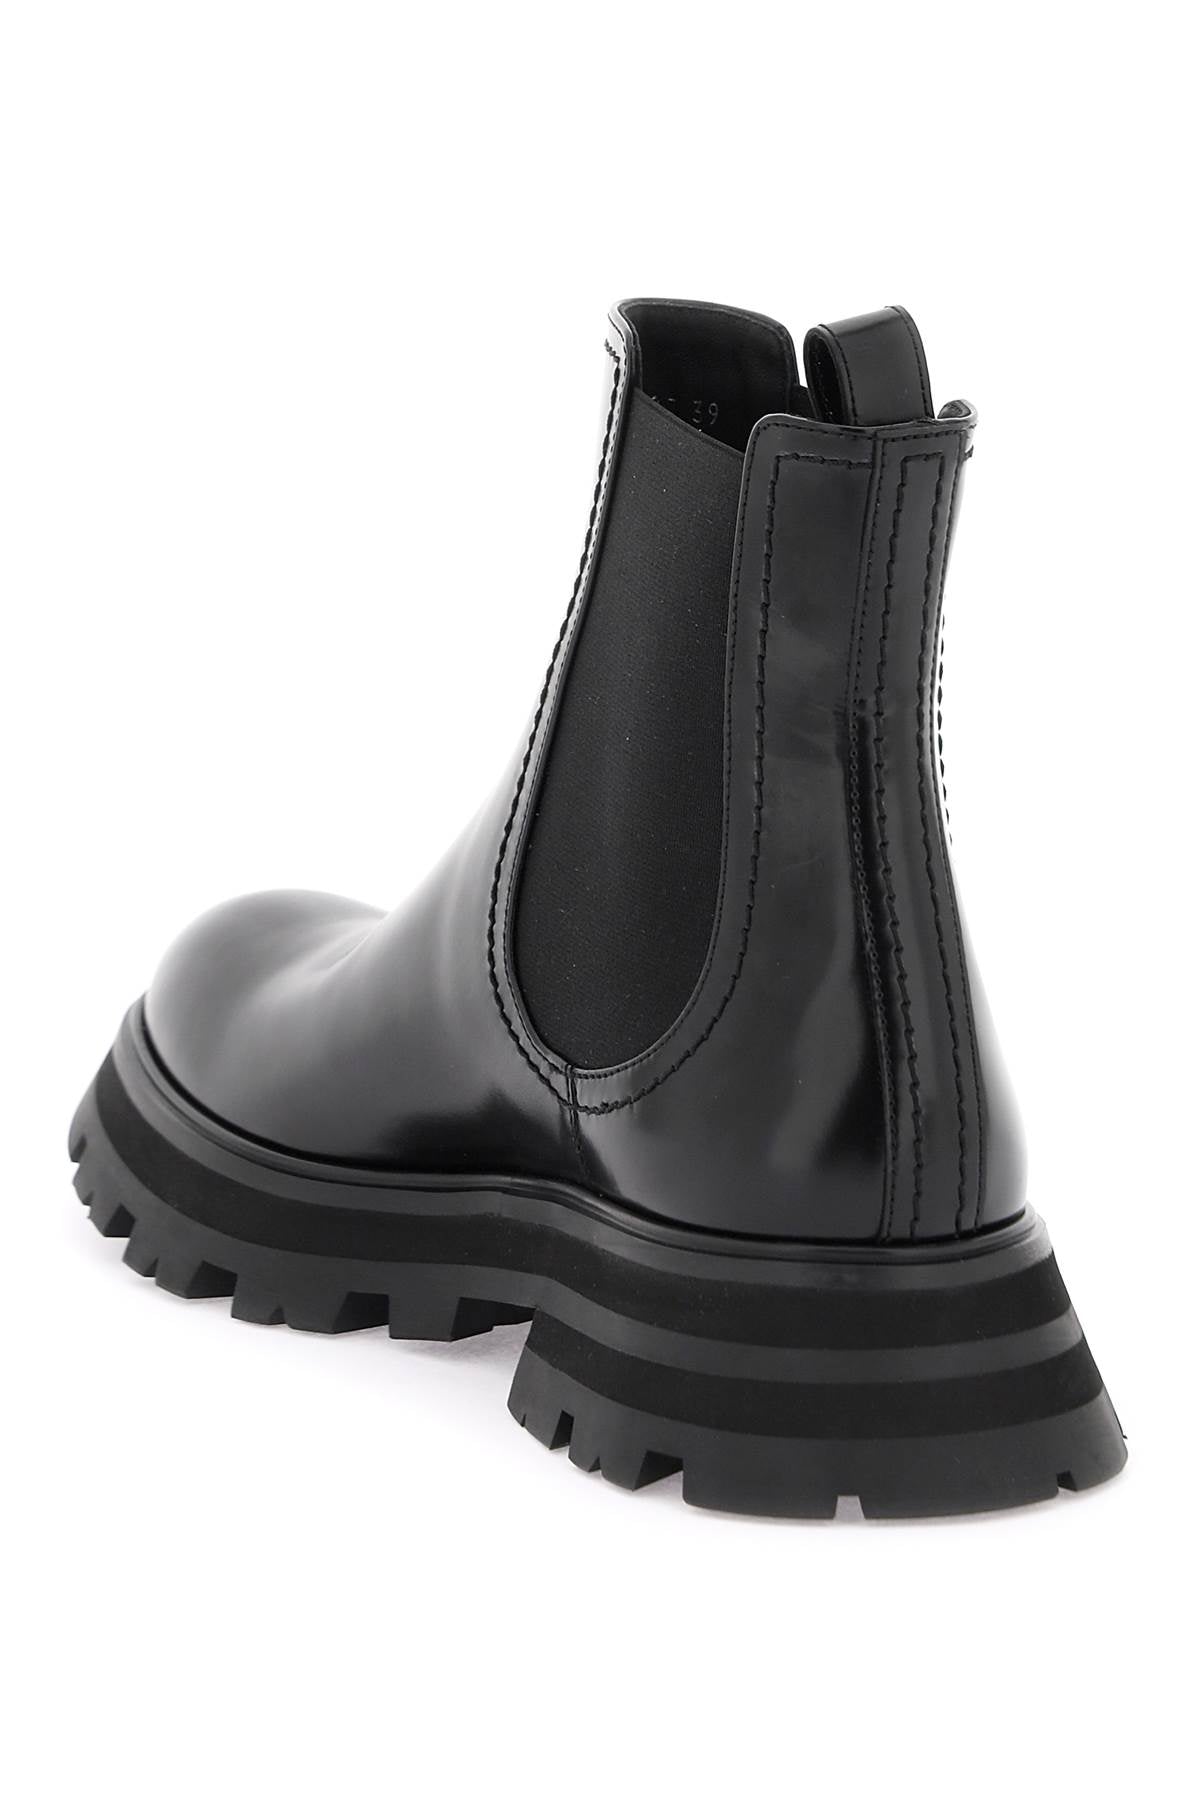 Alexander McQUEEN Shiny Leather Chelsea Boots Black